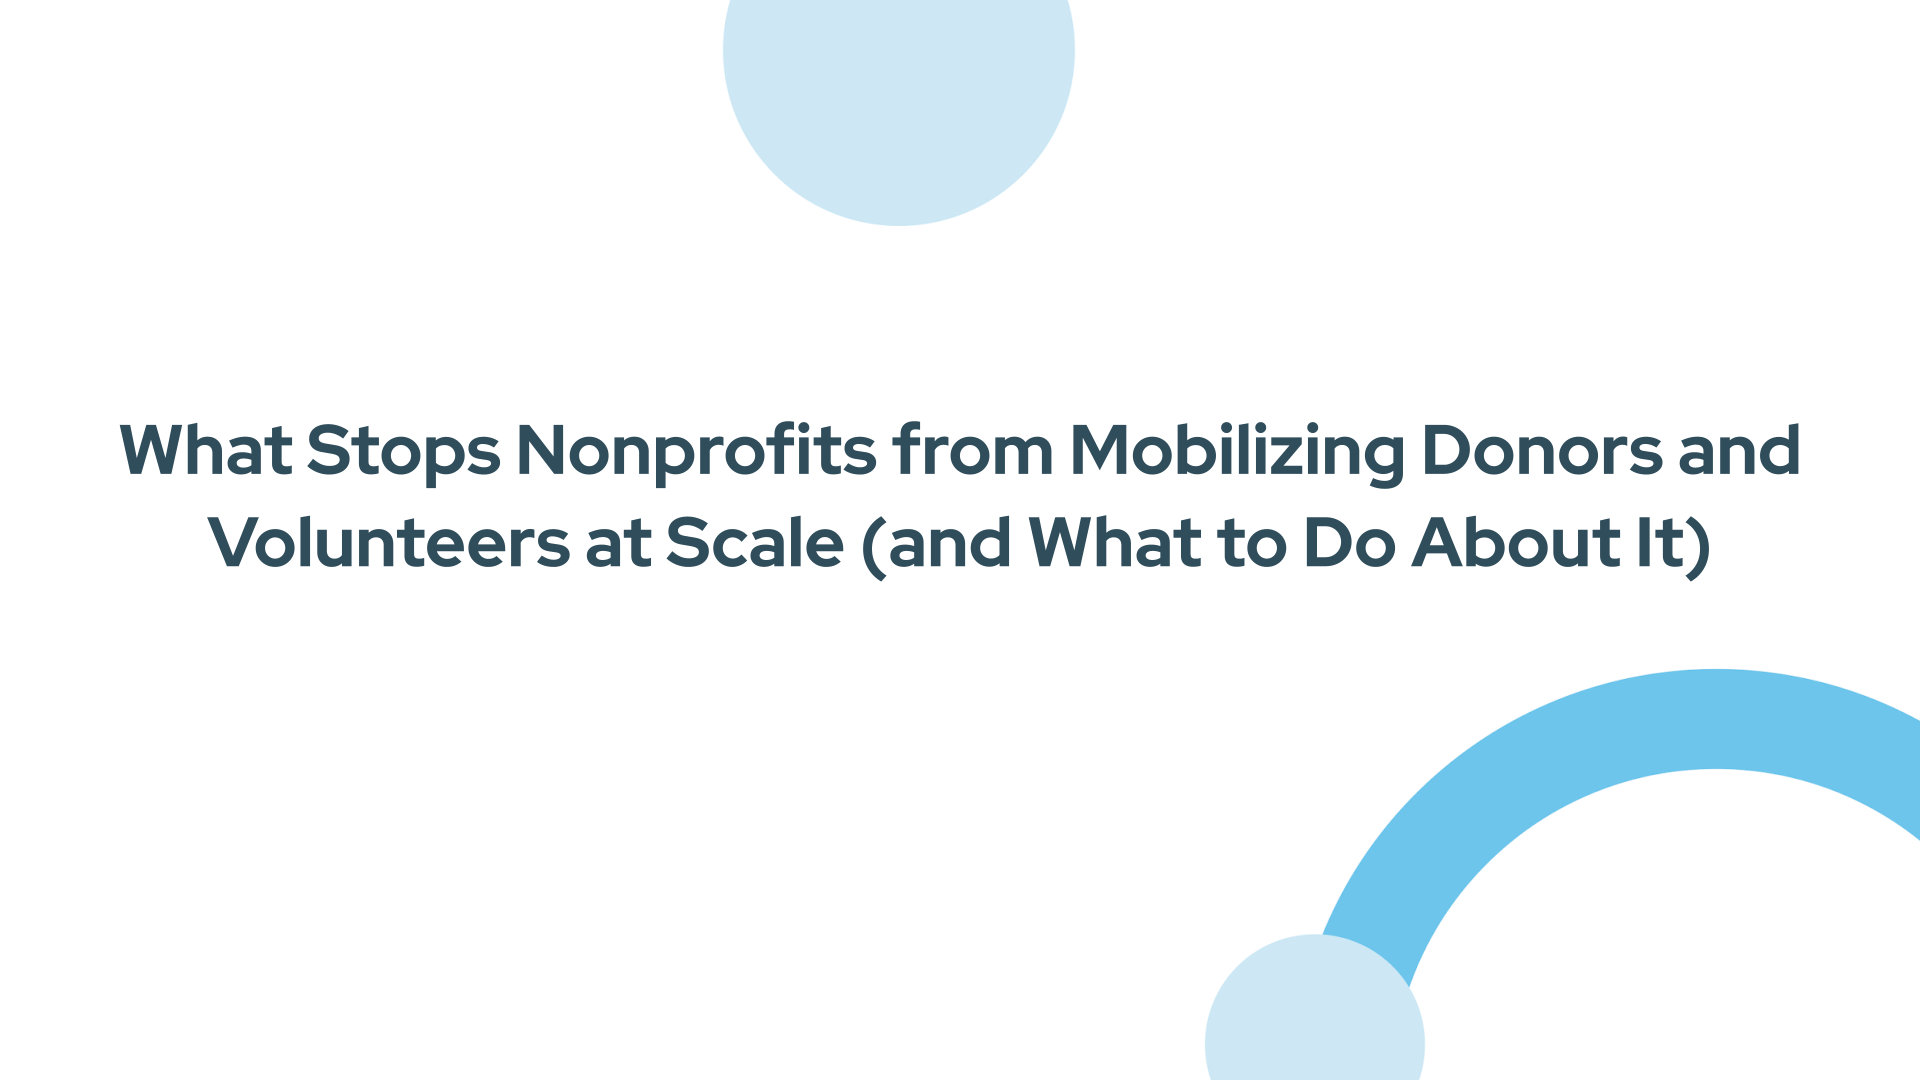 What Stops Nonprofits from Mobilizing Donors and Volunteers at Scale (and What to Do About It)